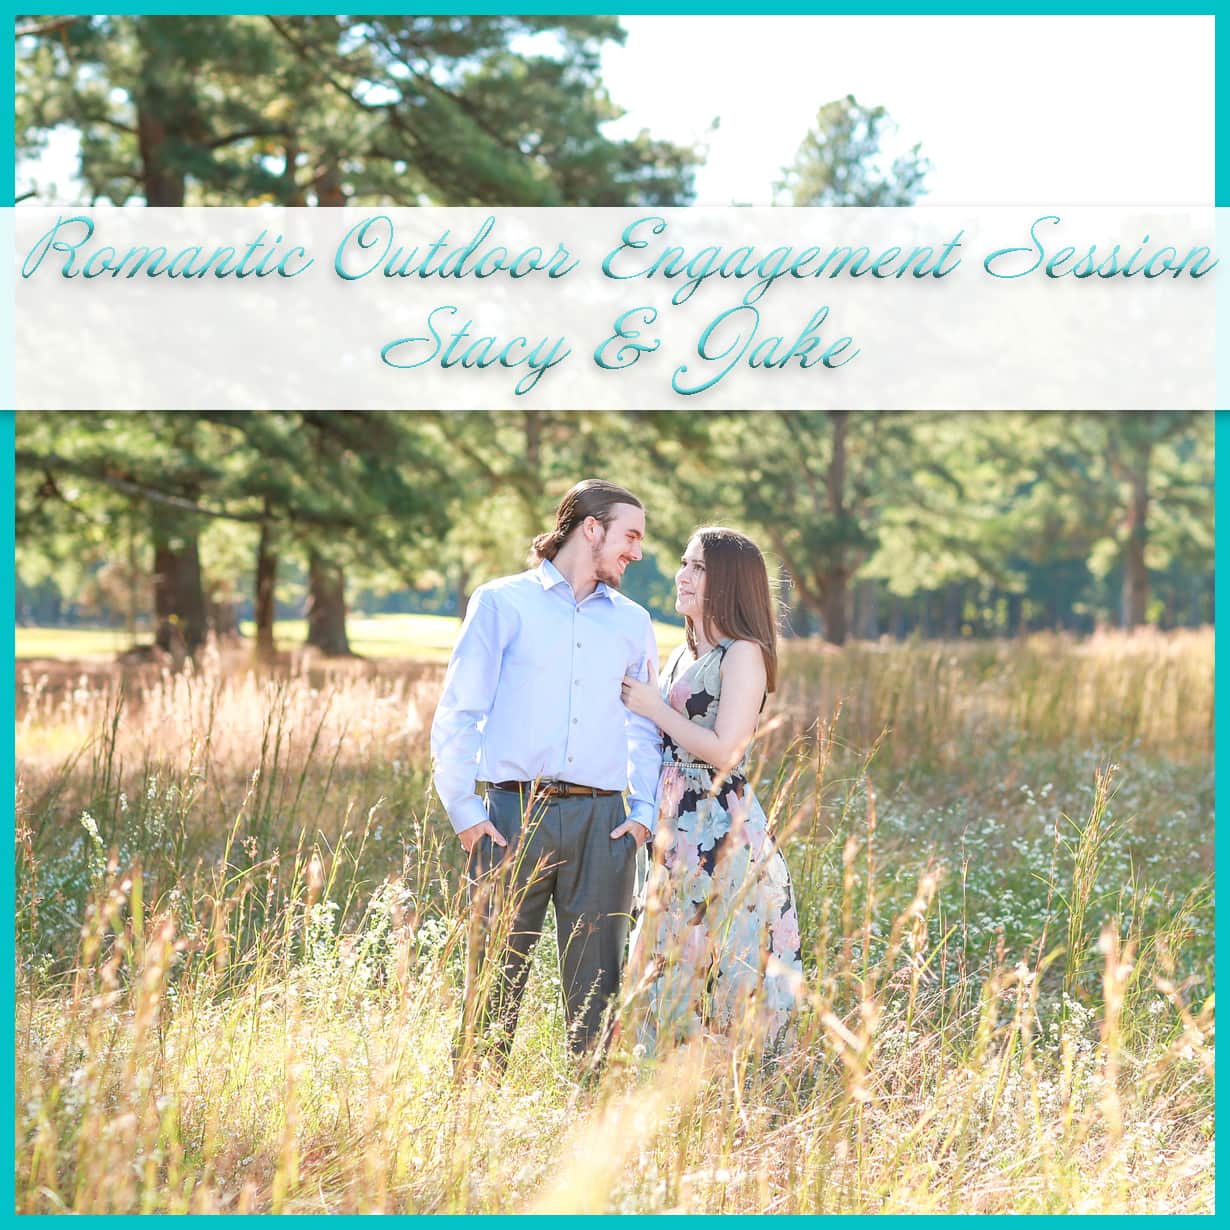 Romantic Outdoor Engagement Session